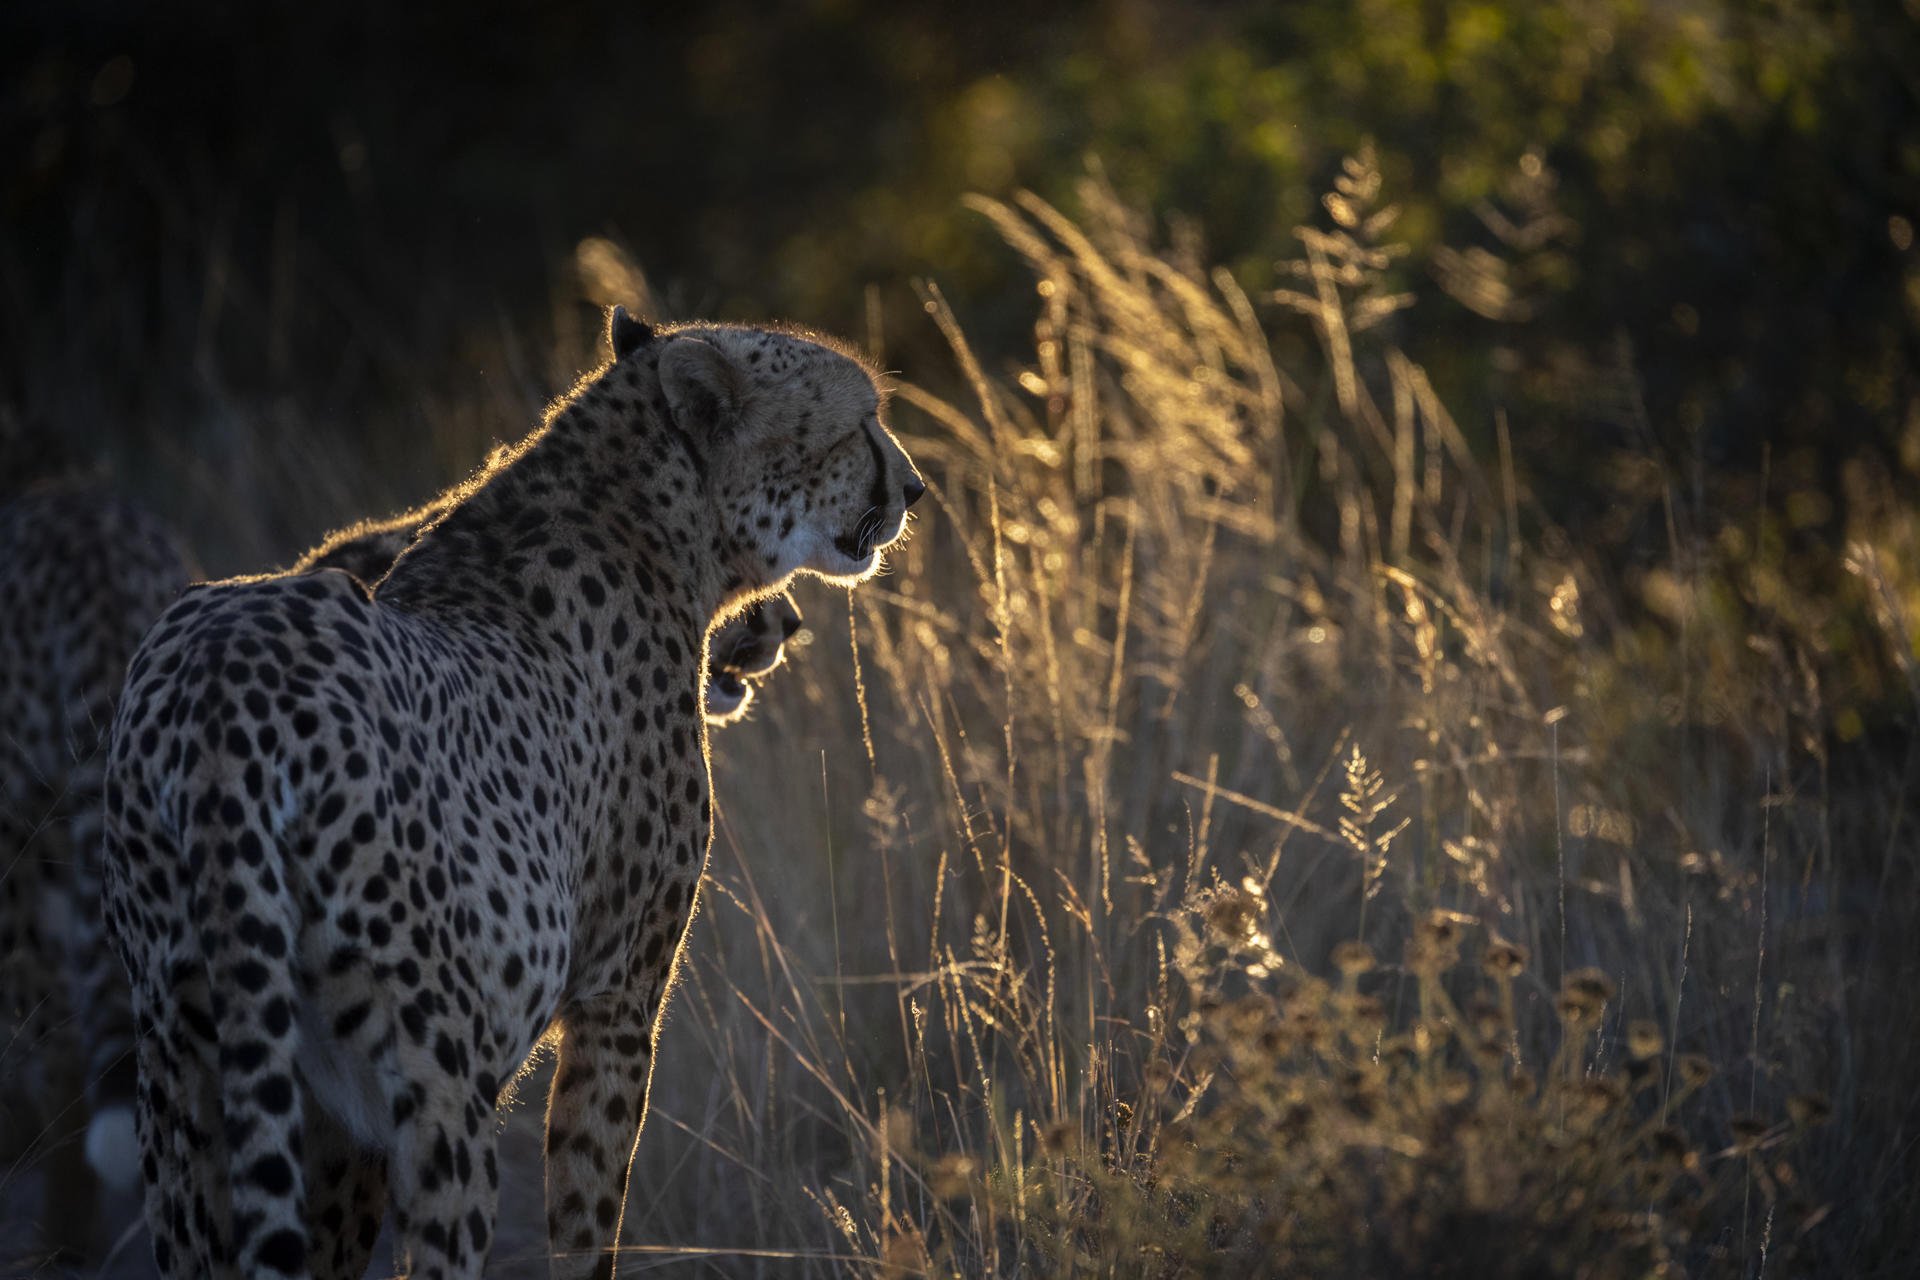 View a cheetah at one of your day safari trips with Cruise Safaris